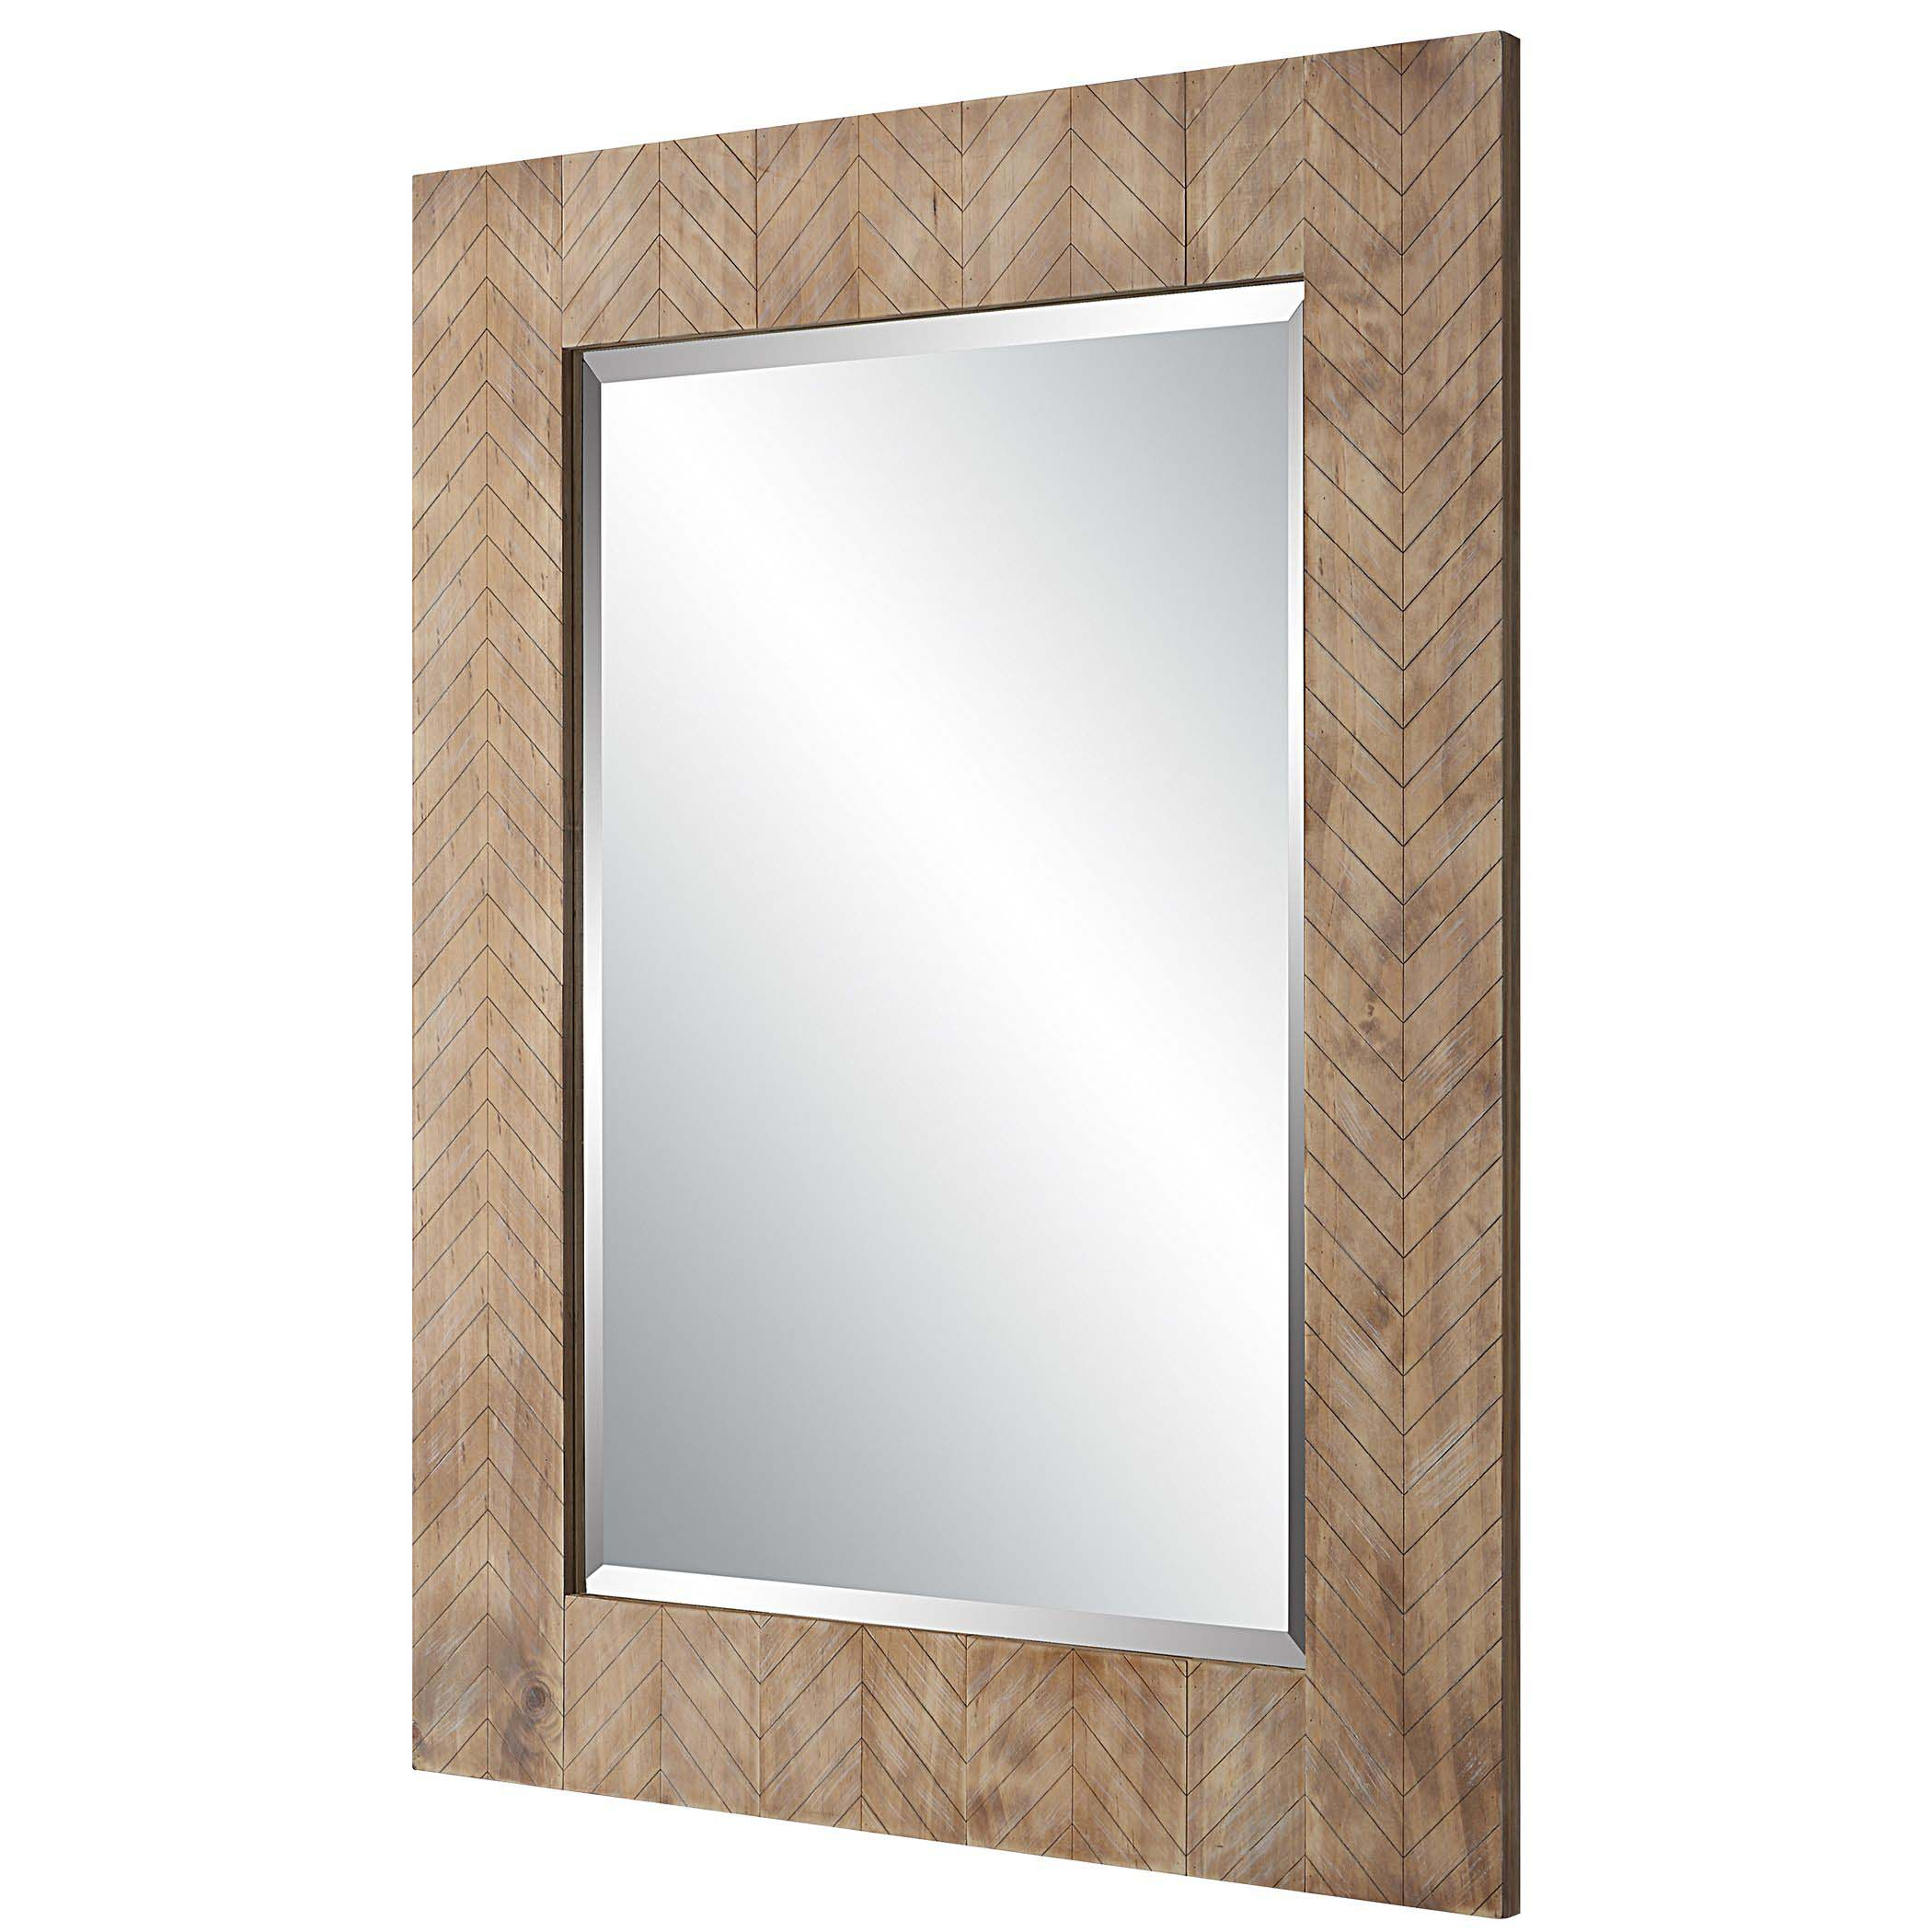 Decor Market Mirror - Chevron Pattern Designed In A Natural Solid Wood